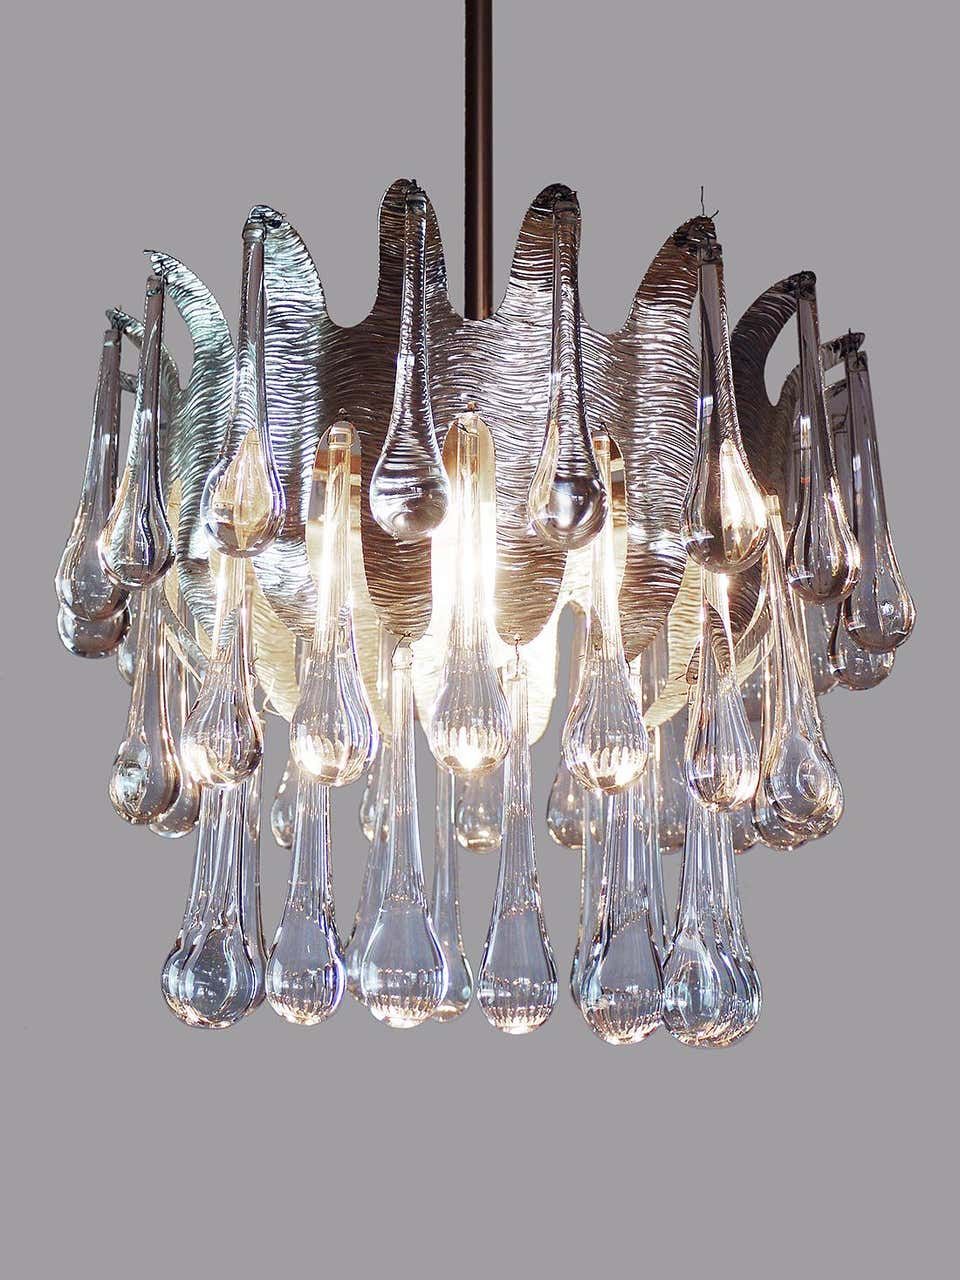 Silver Chandeliers Elegant Lighting Fixtures for a Luxurious Ambiance